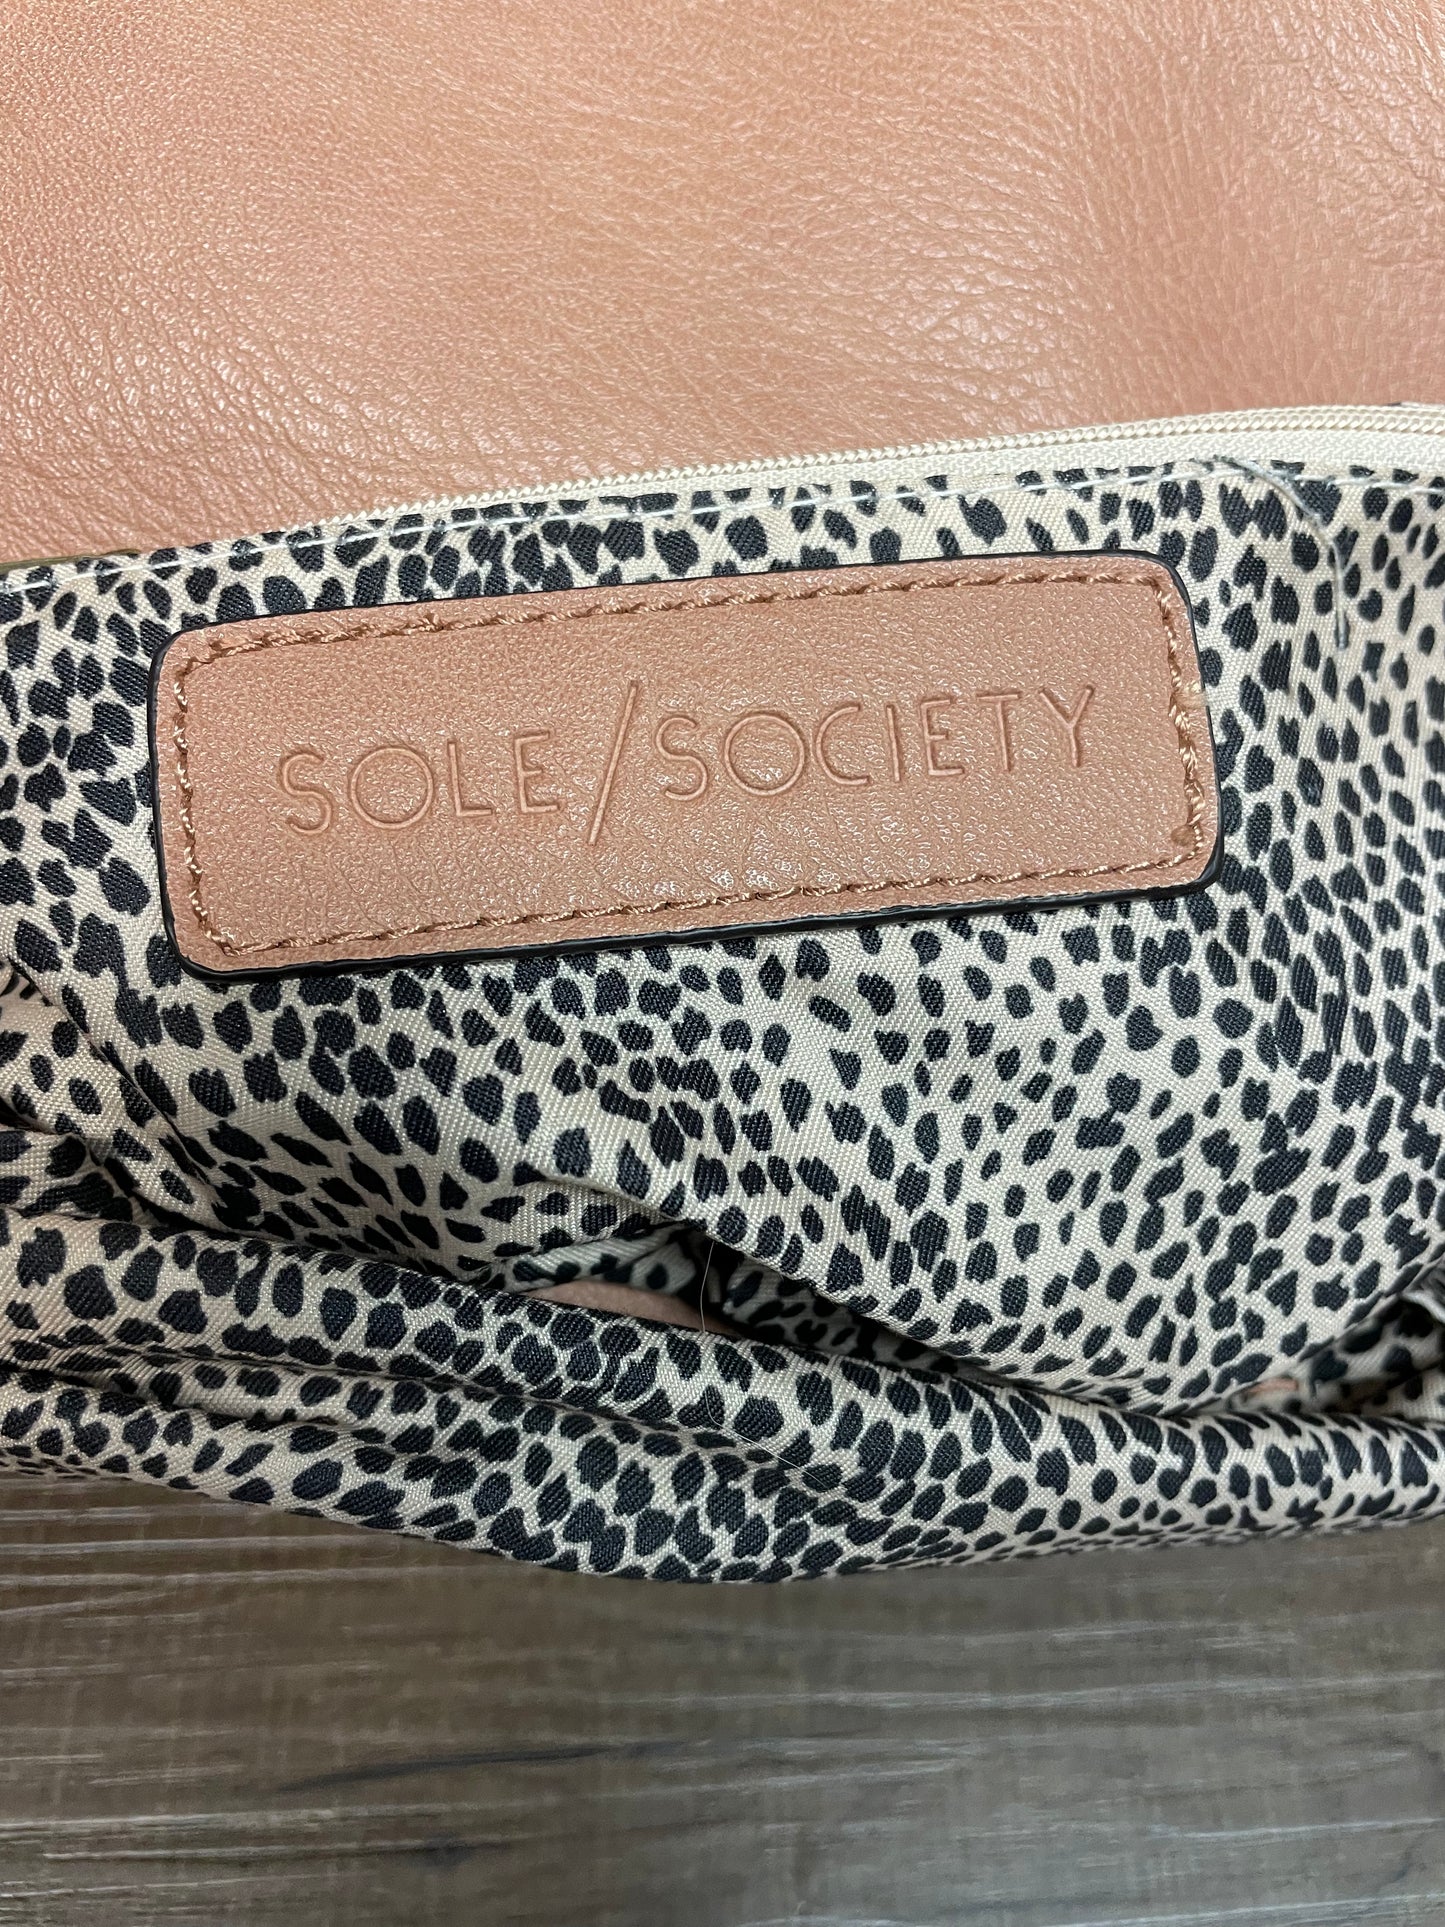 Sole Society Fold Over Clutch